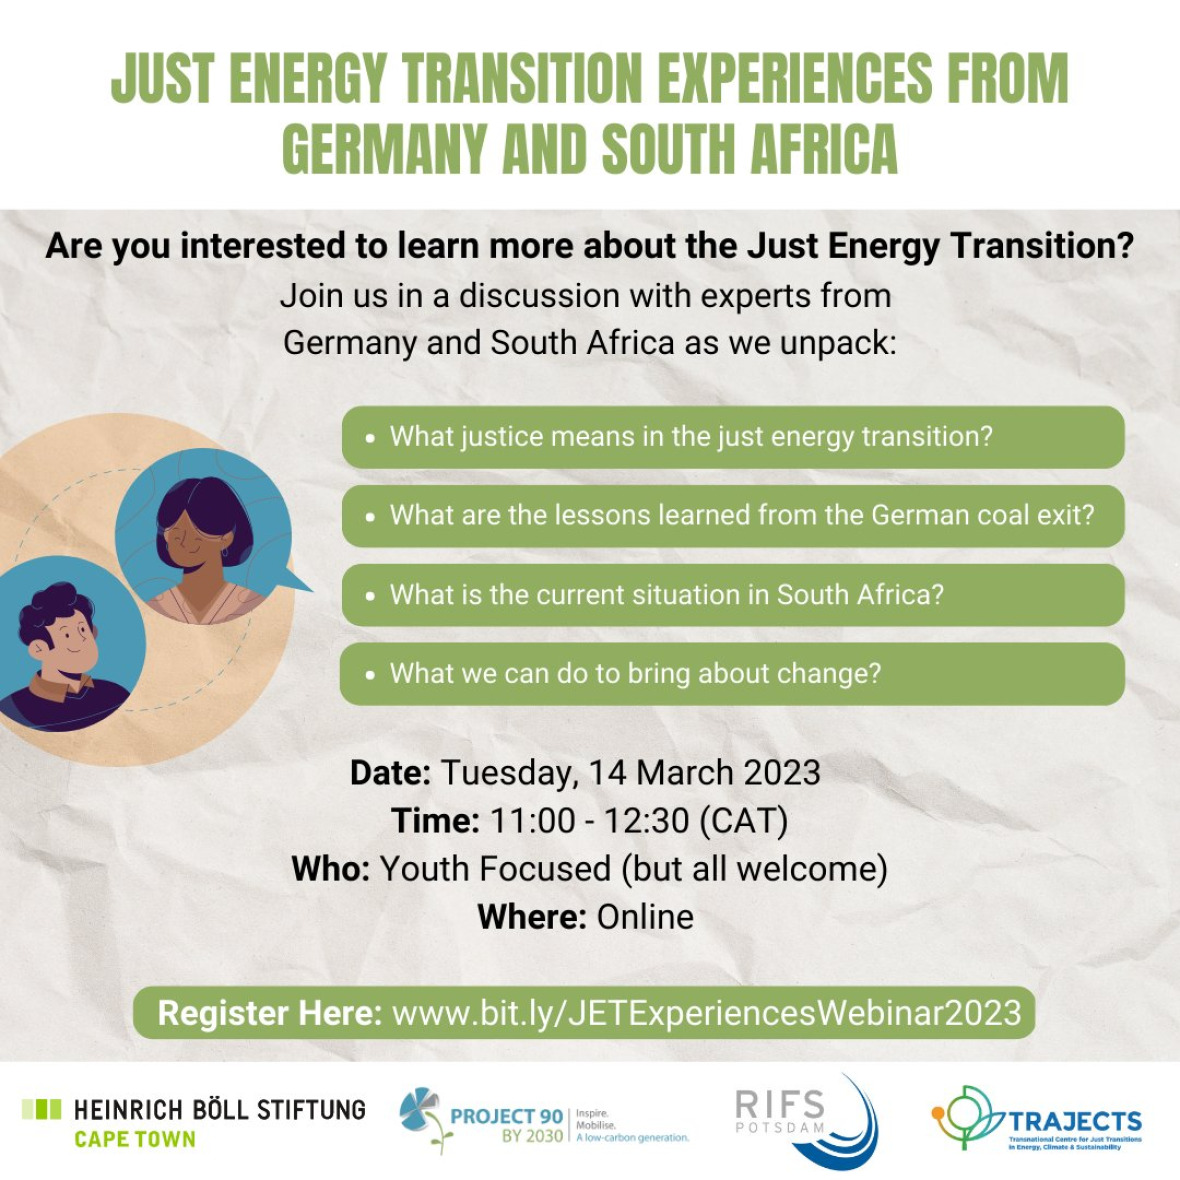 Just energy transitions in Germany and South Africa